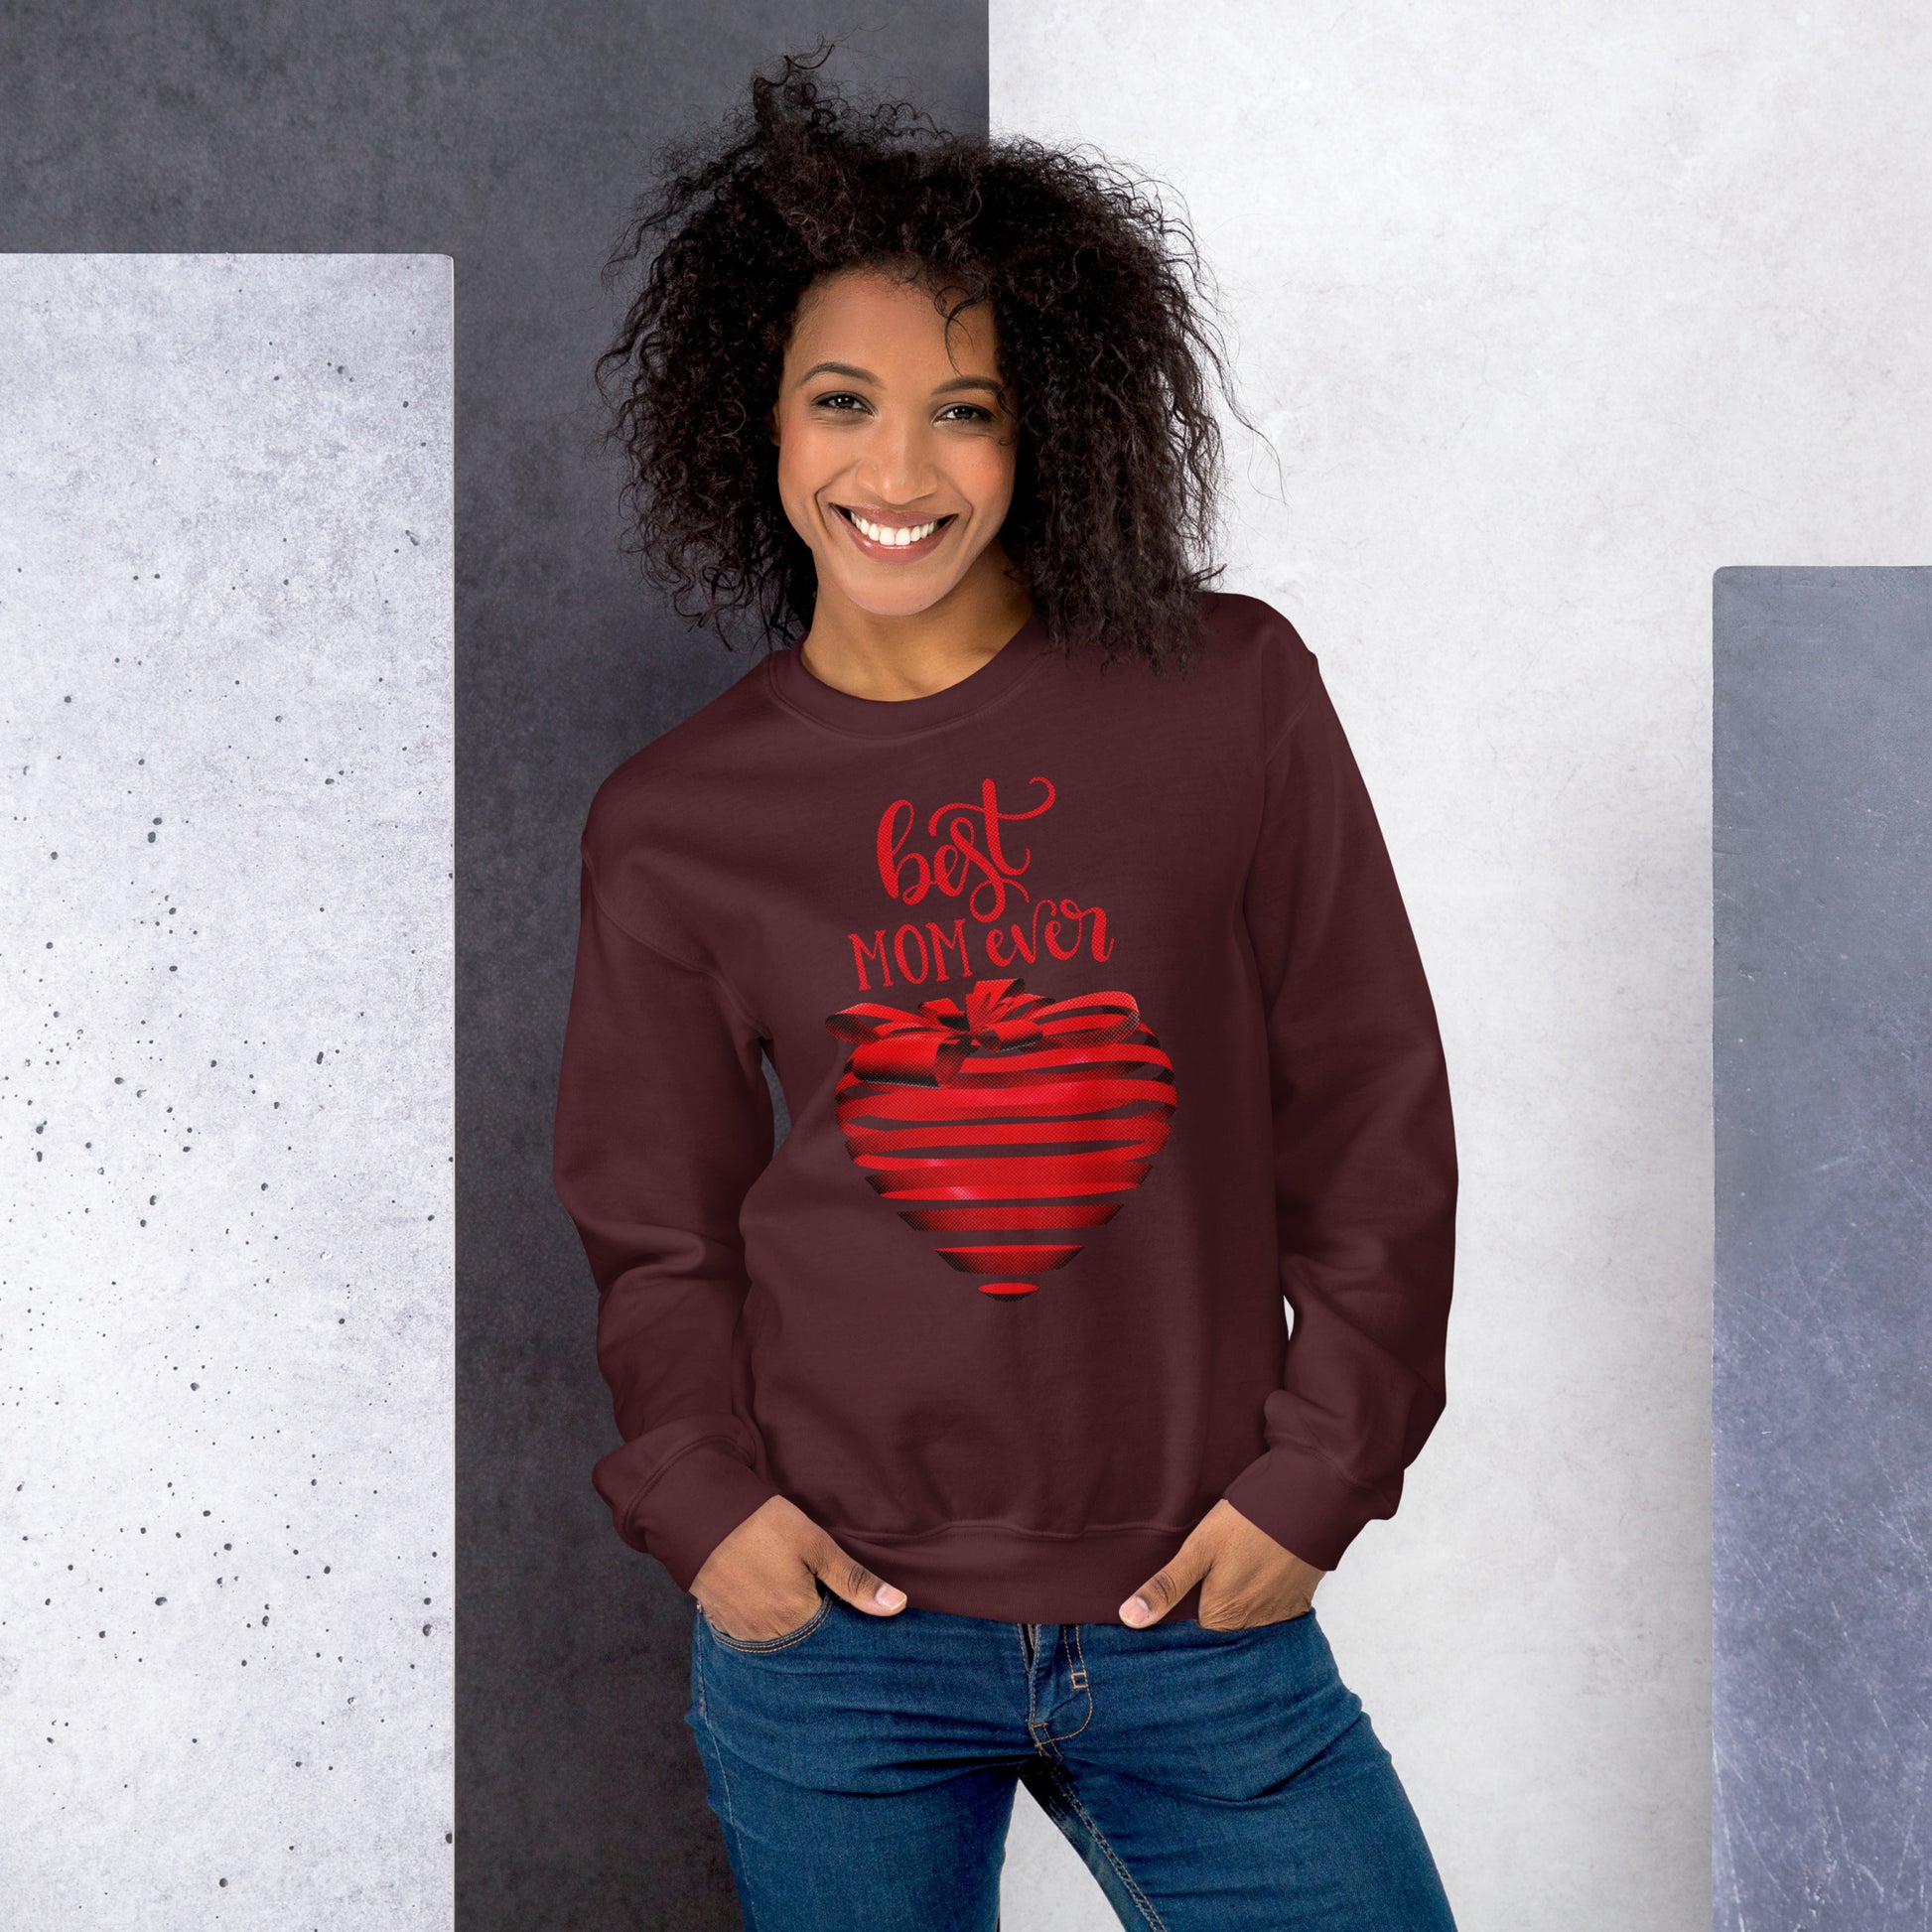 Women with maroon sweater with red text best MOM Ever and red heart